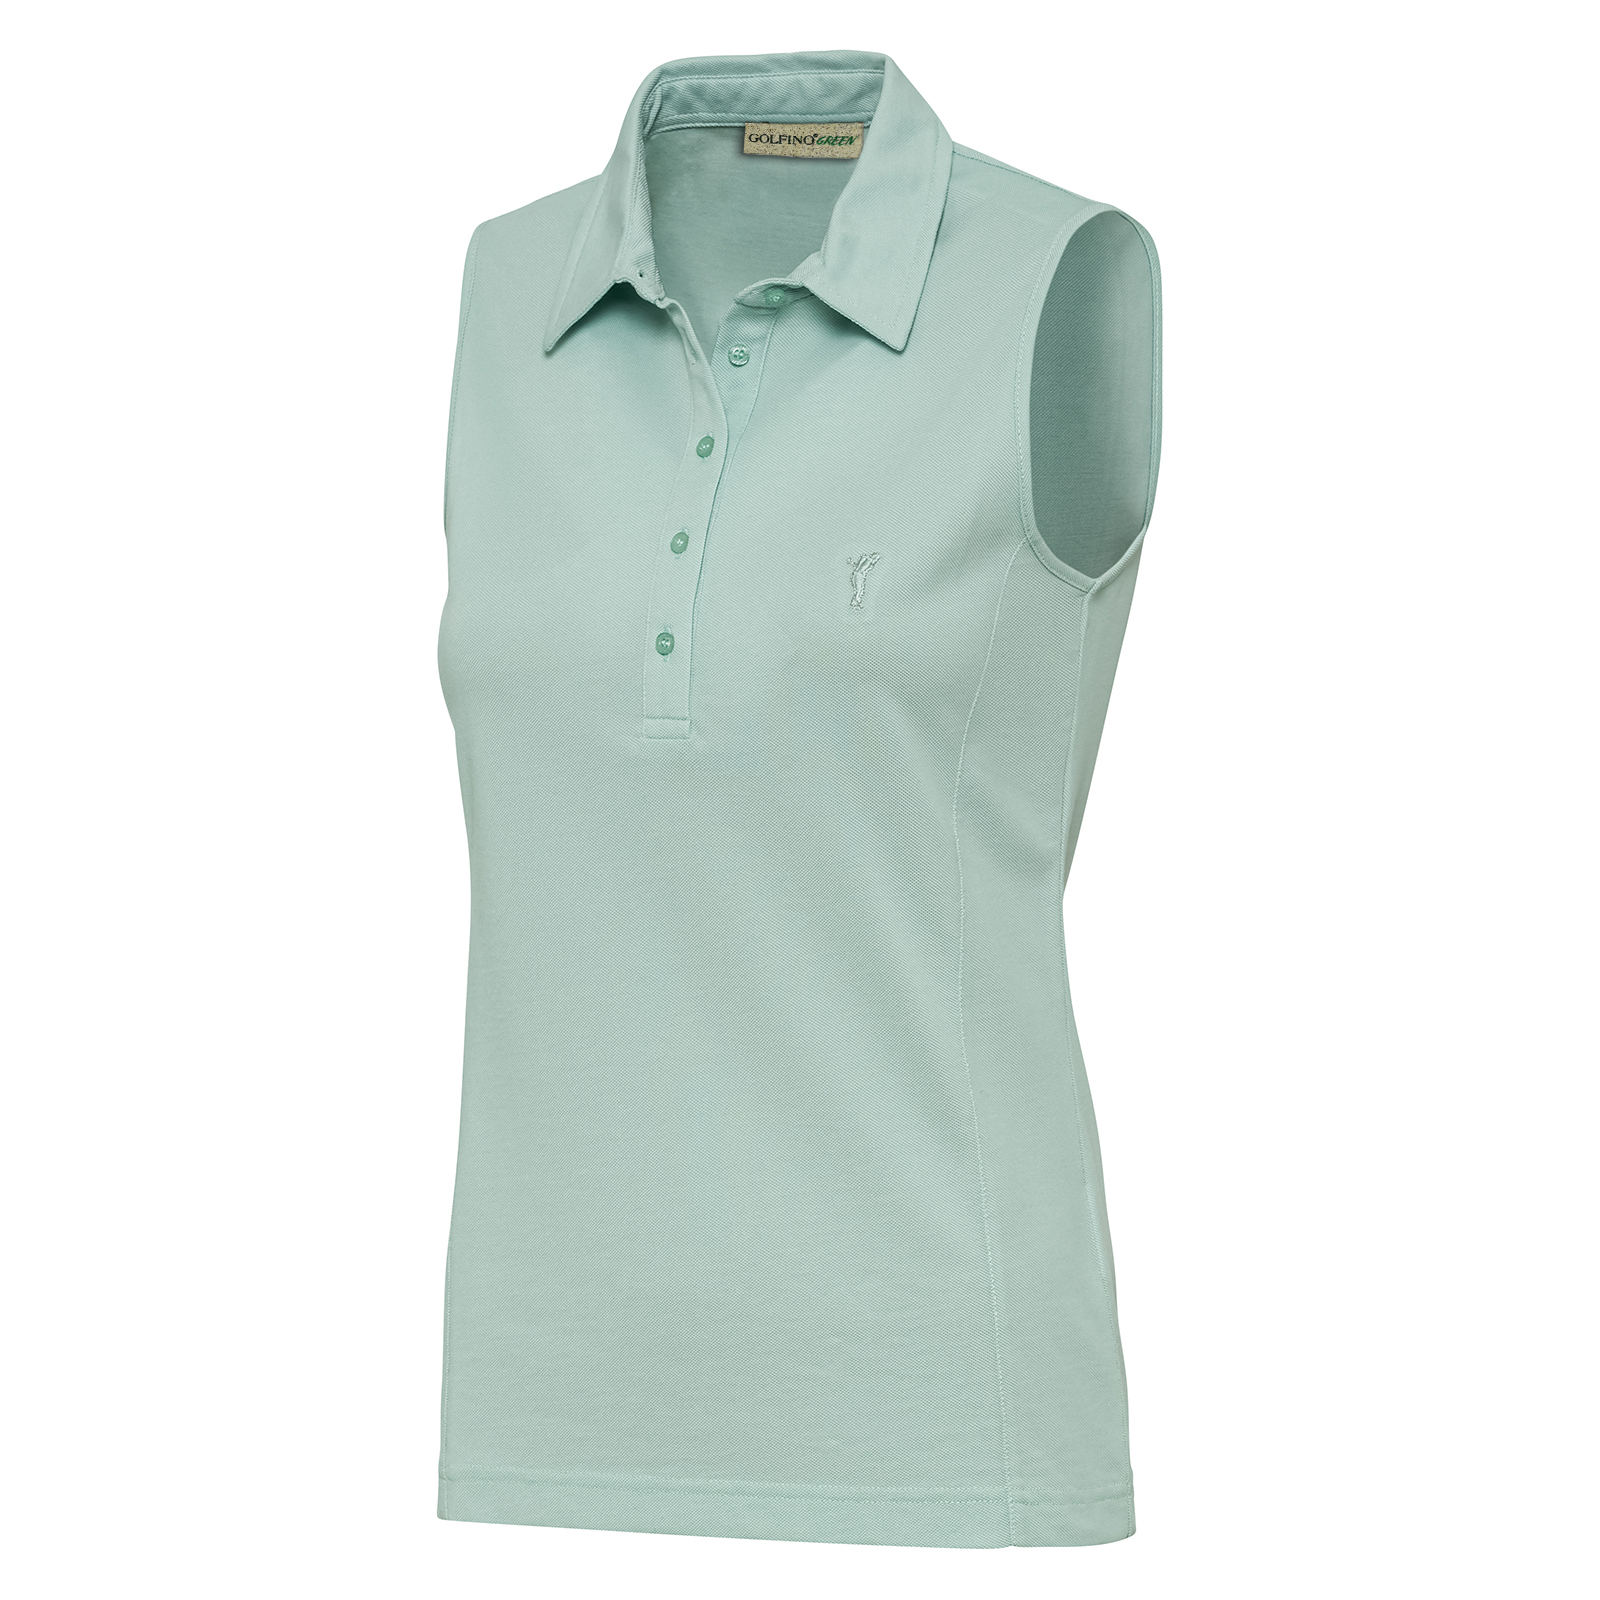 Ladies' golf top made from sustainably produced fabric